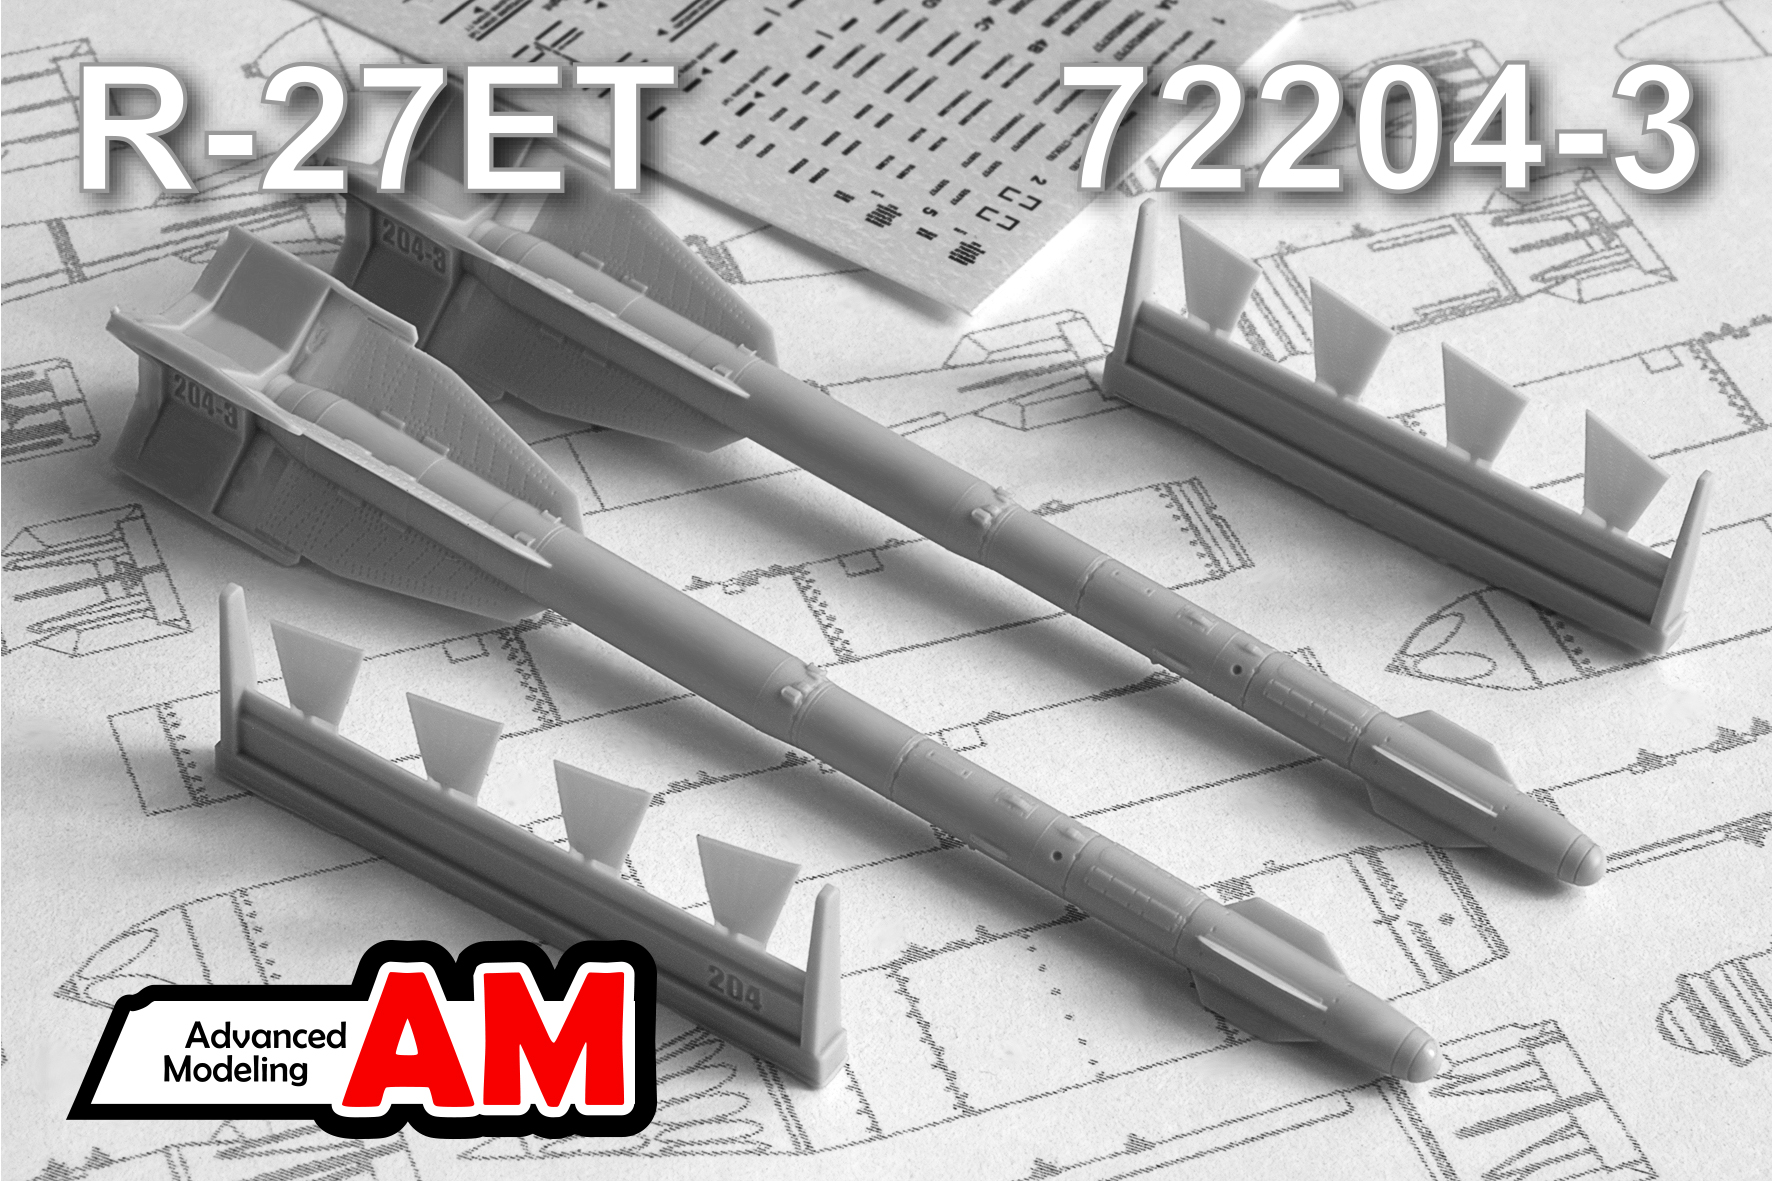 Additions (3D resin printing) 1/72 R-27ET Air to Air missile (Advanced Modeling) 